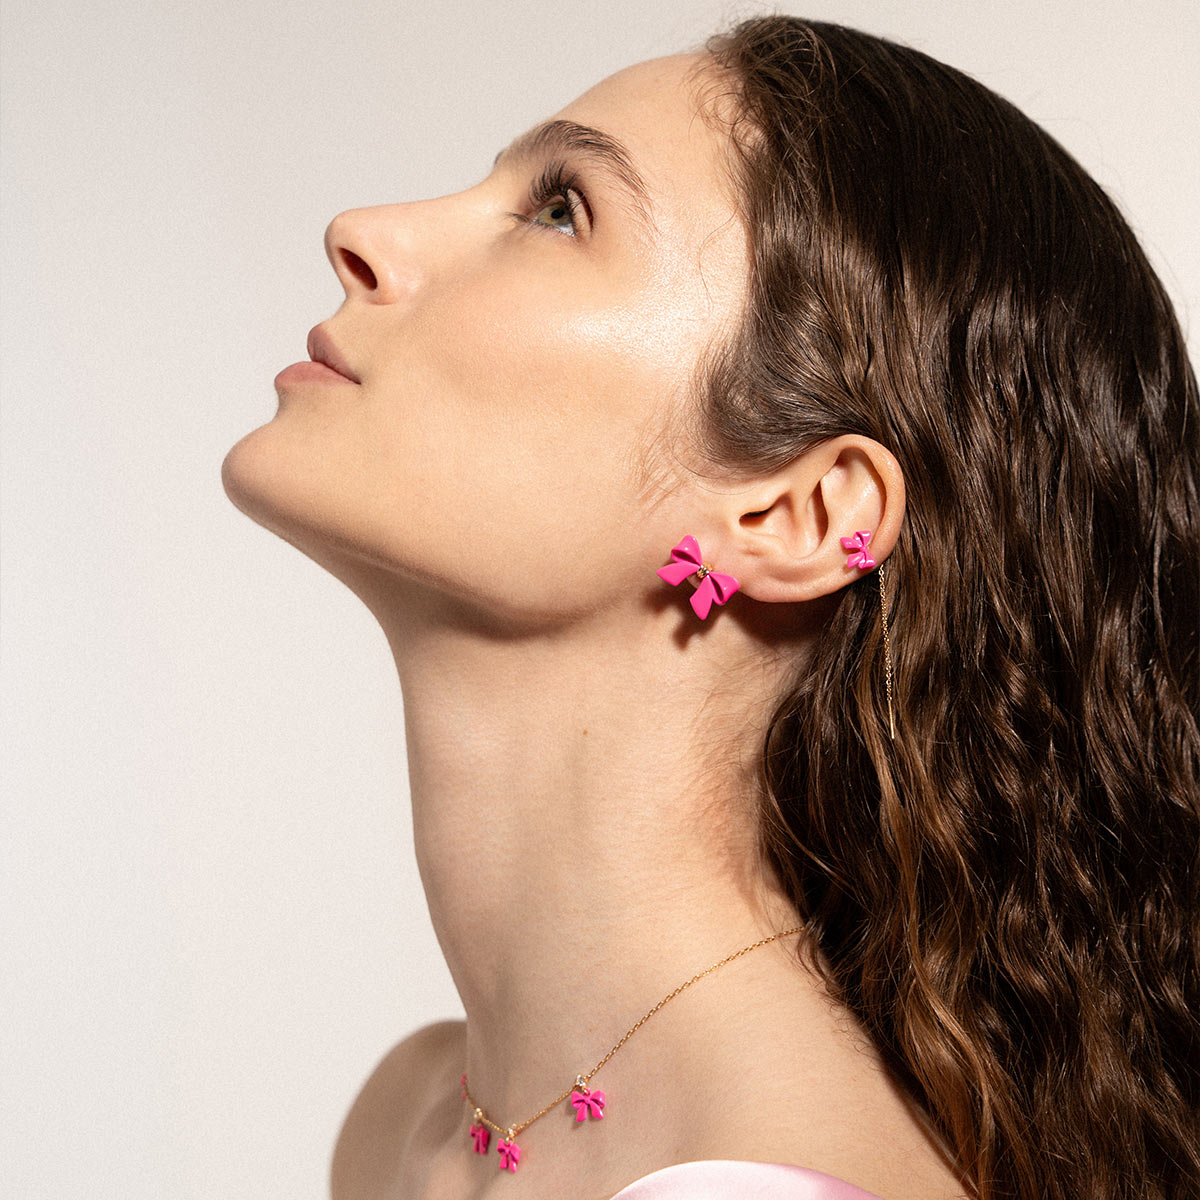 Earrings - Single earring with dangling chain and bow neon pink - CANDY BOW - 3 | Rue des Mille